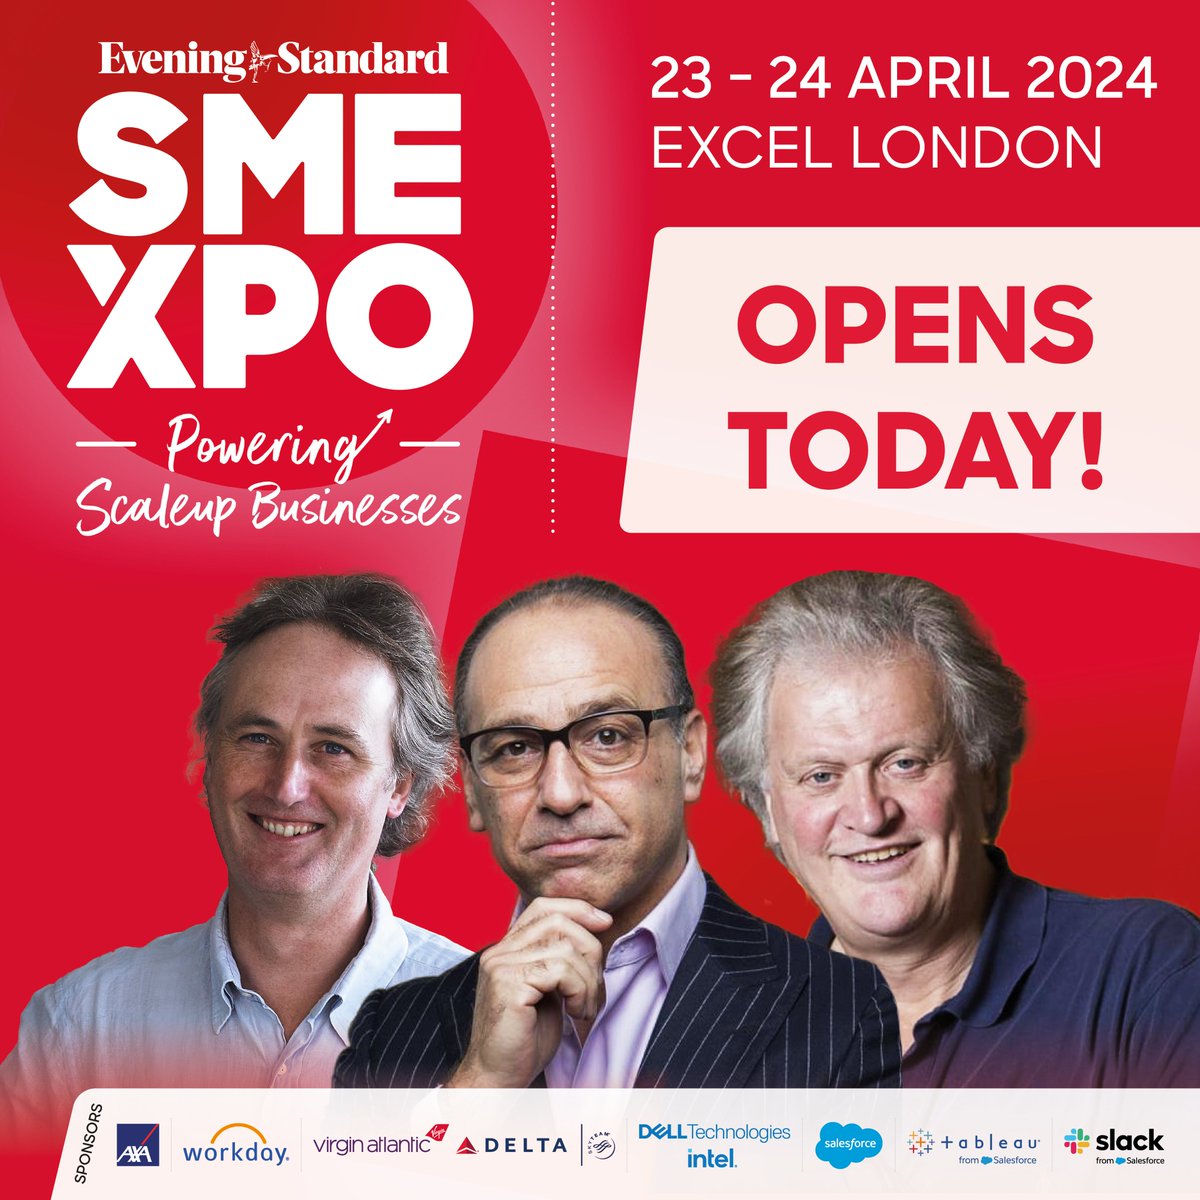 #SMEXPO2024 opens today!   

The LCCI team will be there today & tomorrow to meet with businesses. Visit us from 9:30 to 17:00 at ExCel London.

👉FREE to attend. There's still time to grab your ticket: sme-xpo-2024.reg.buzz/socialmedia